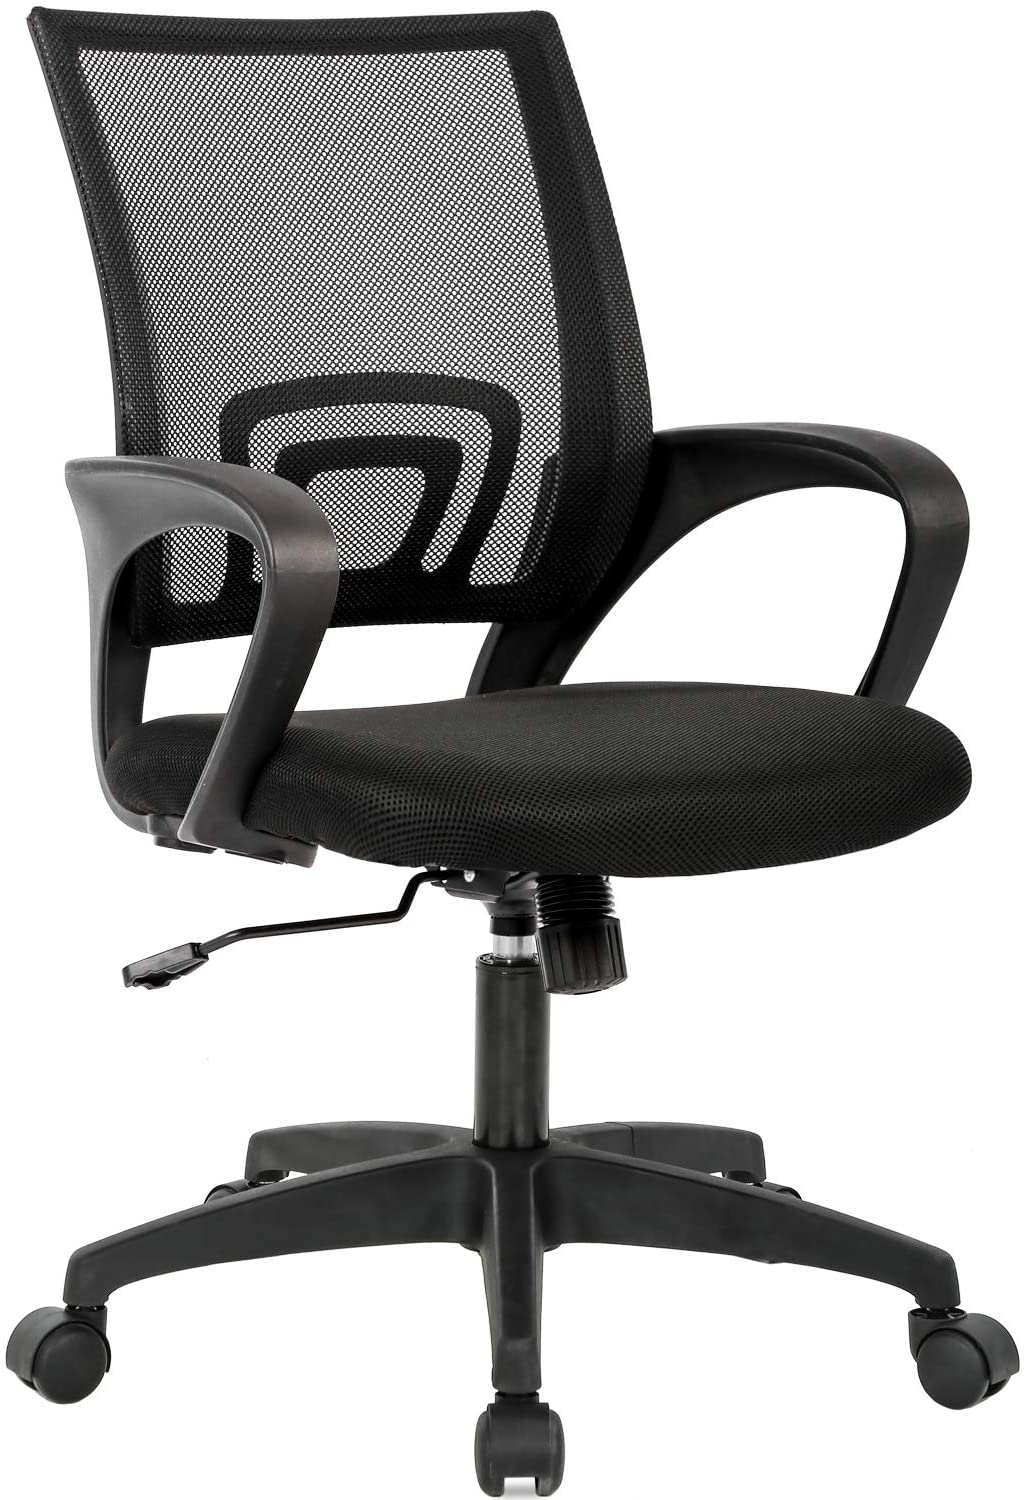 Review of Home Office Mesh Computer Chair with Lumbar Support